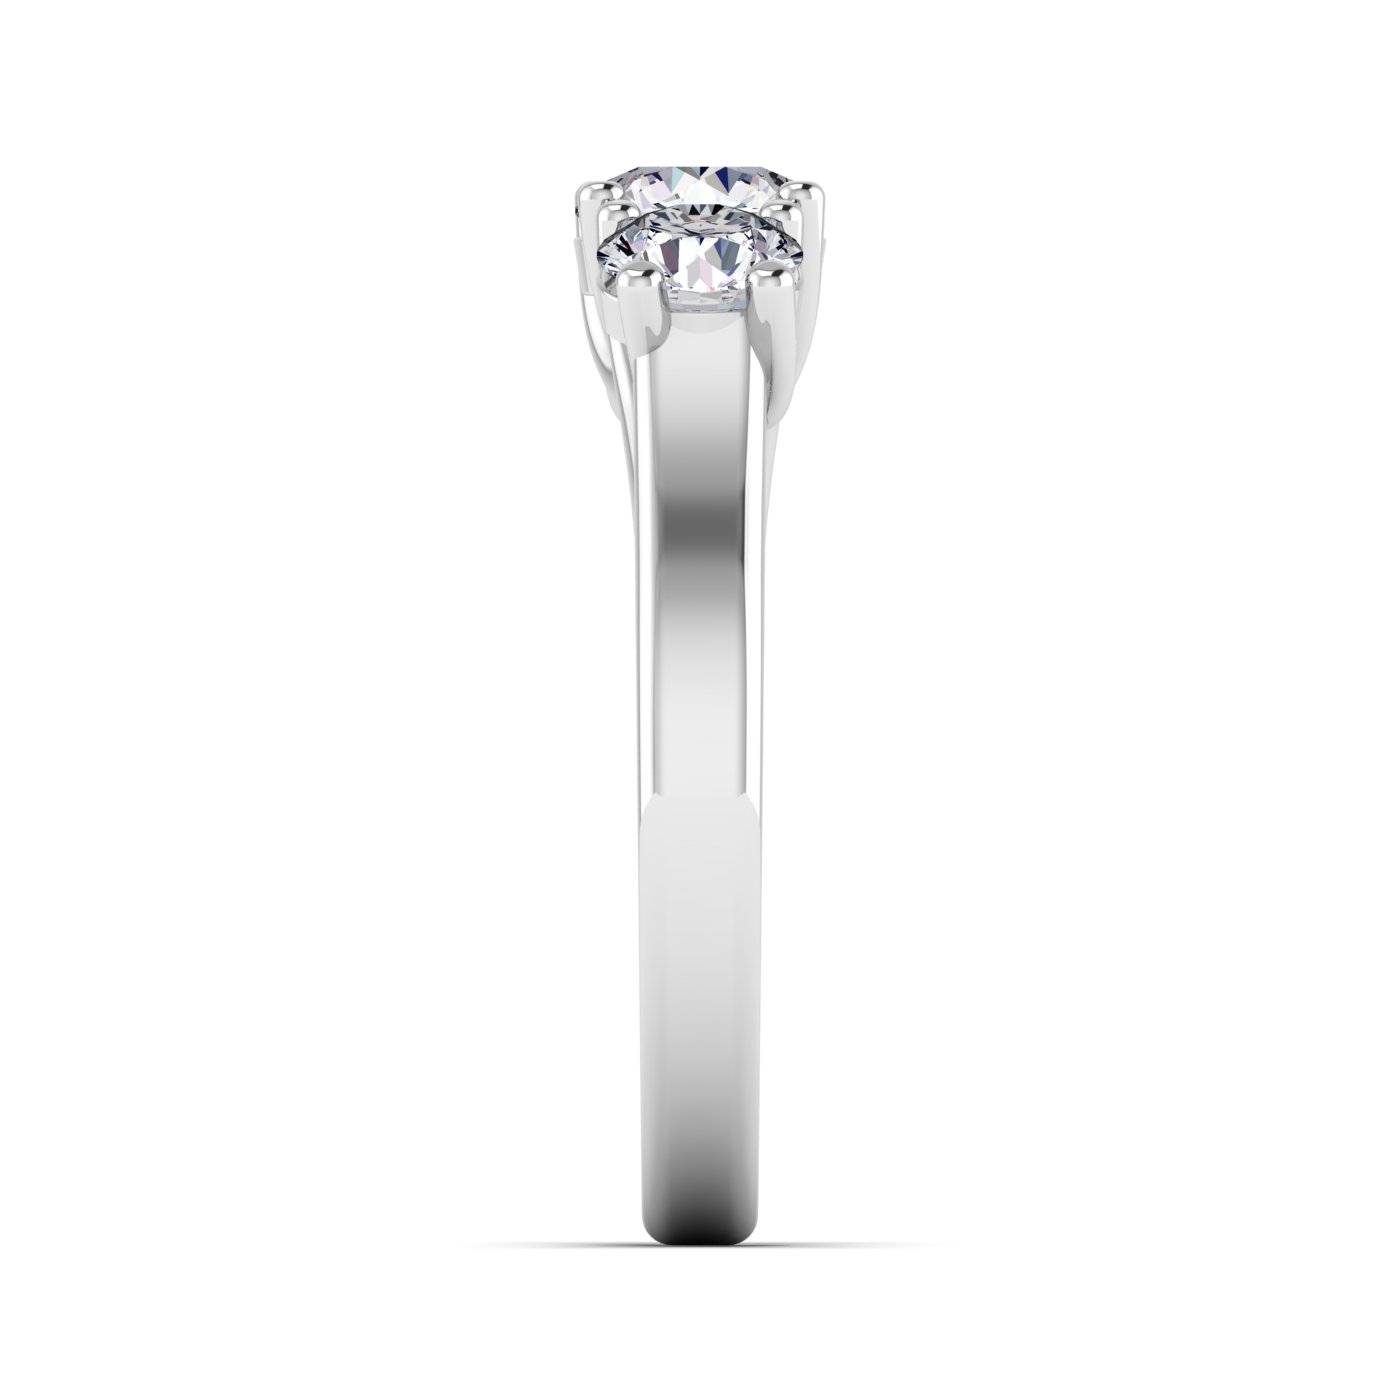 14K white gold three stone engagement ring with round lab grown diamonds and a polished band